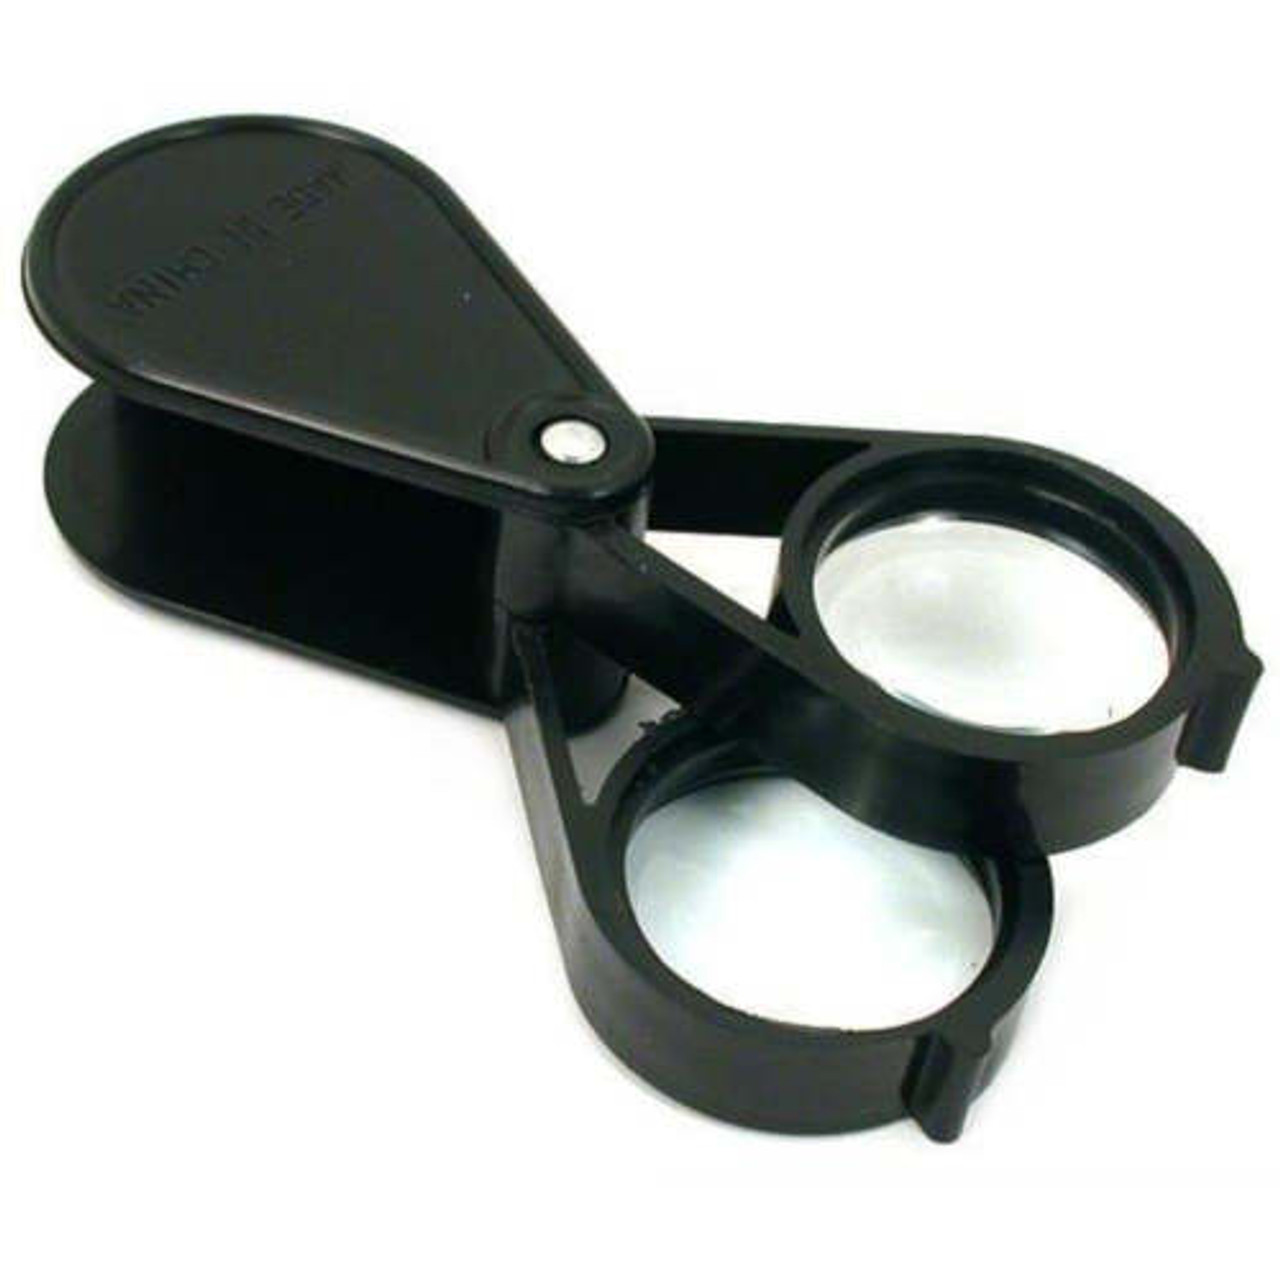 Duel lens 3x-6x Magnification Educational Magnifier MADE IN USA